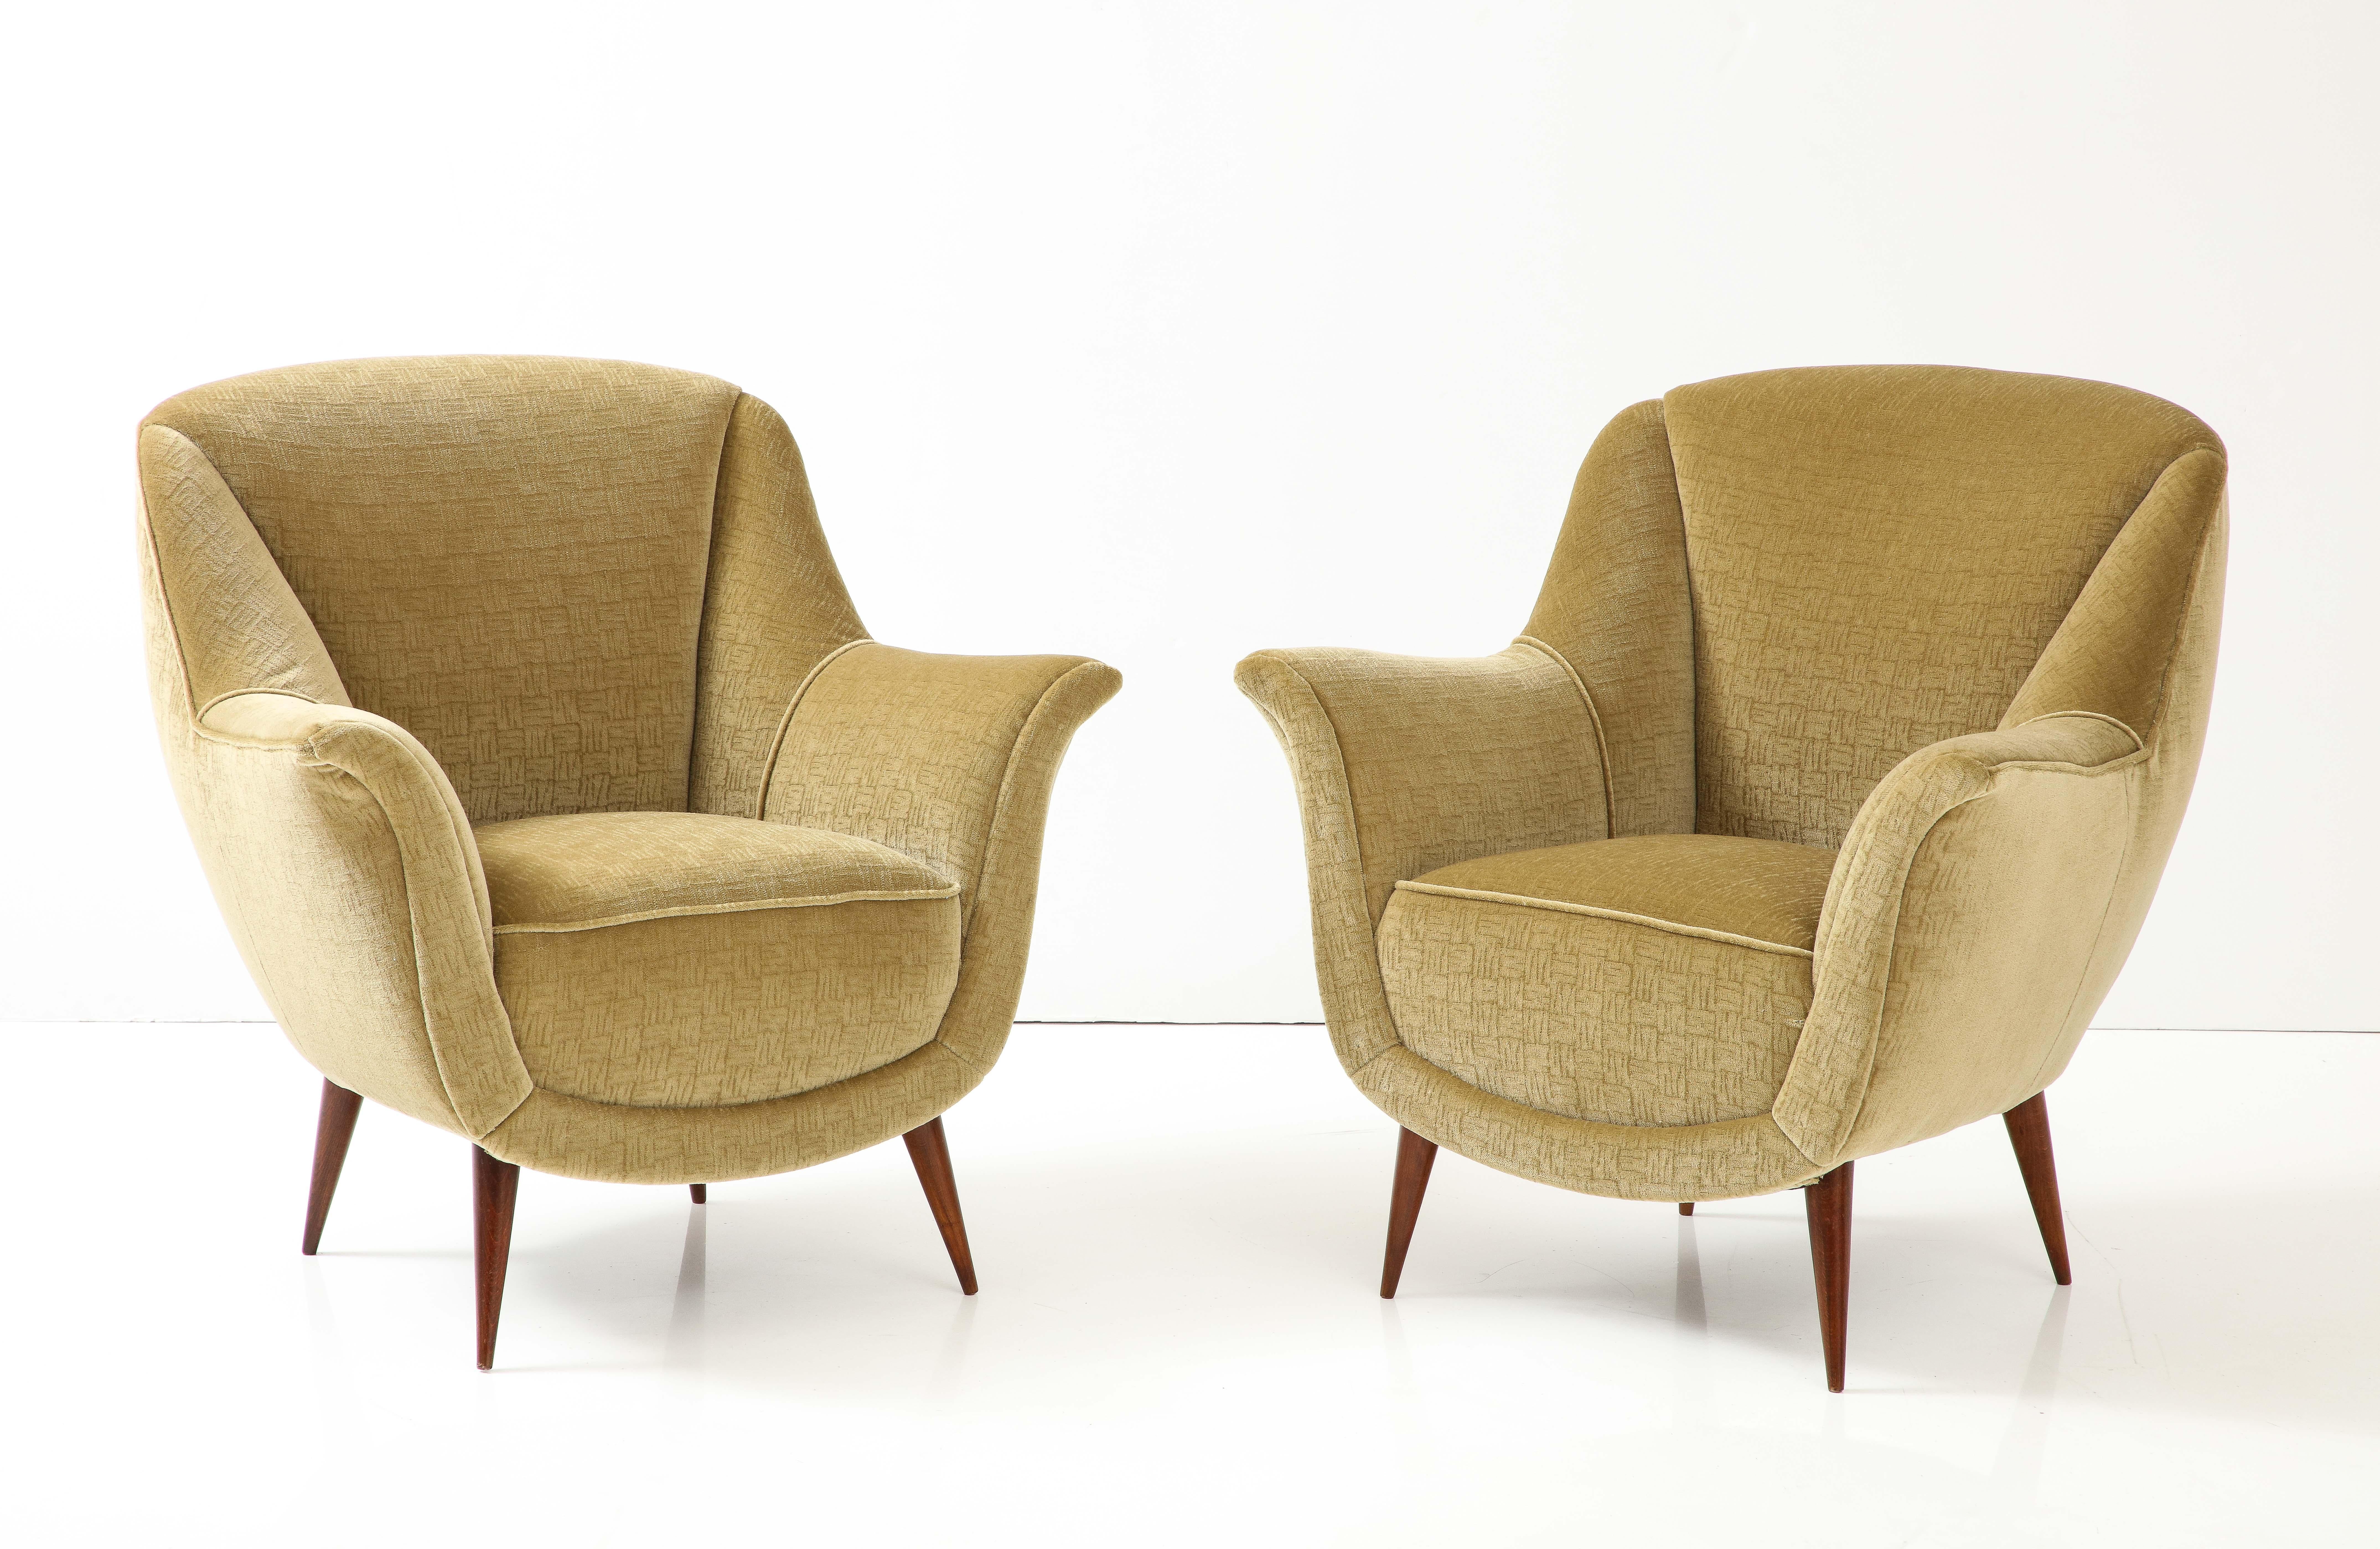 1950's Modernist Gio Ponti Style Italian Lounge Chairs In Mohair Upholstery For Sale 6